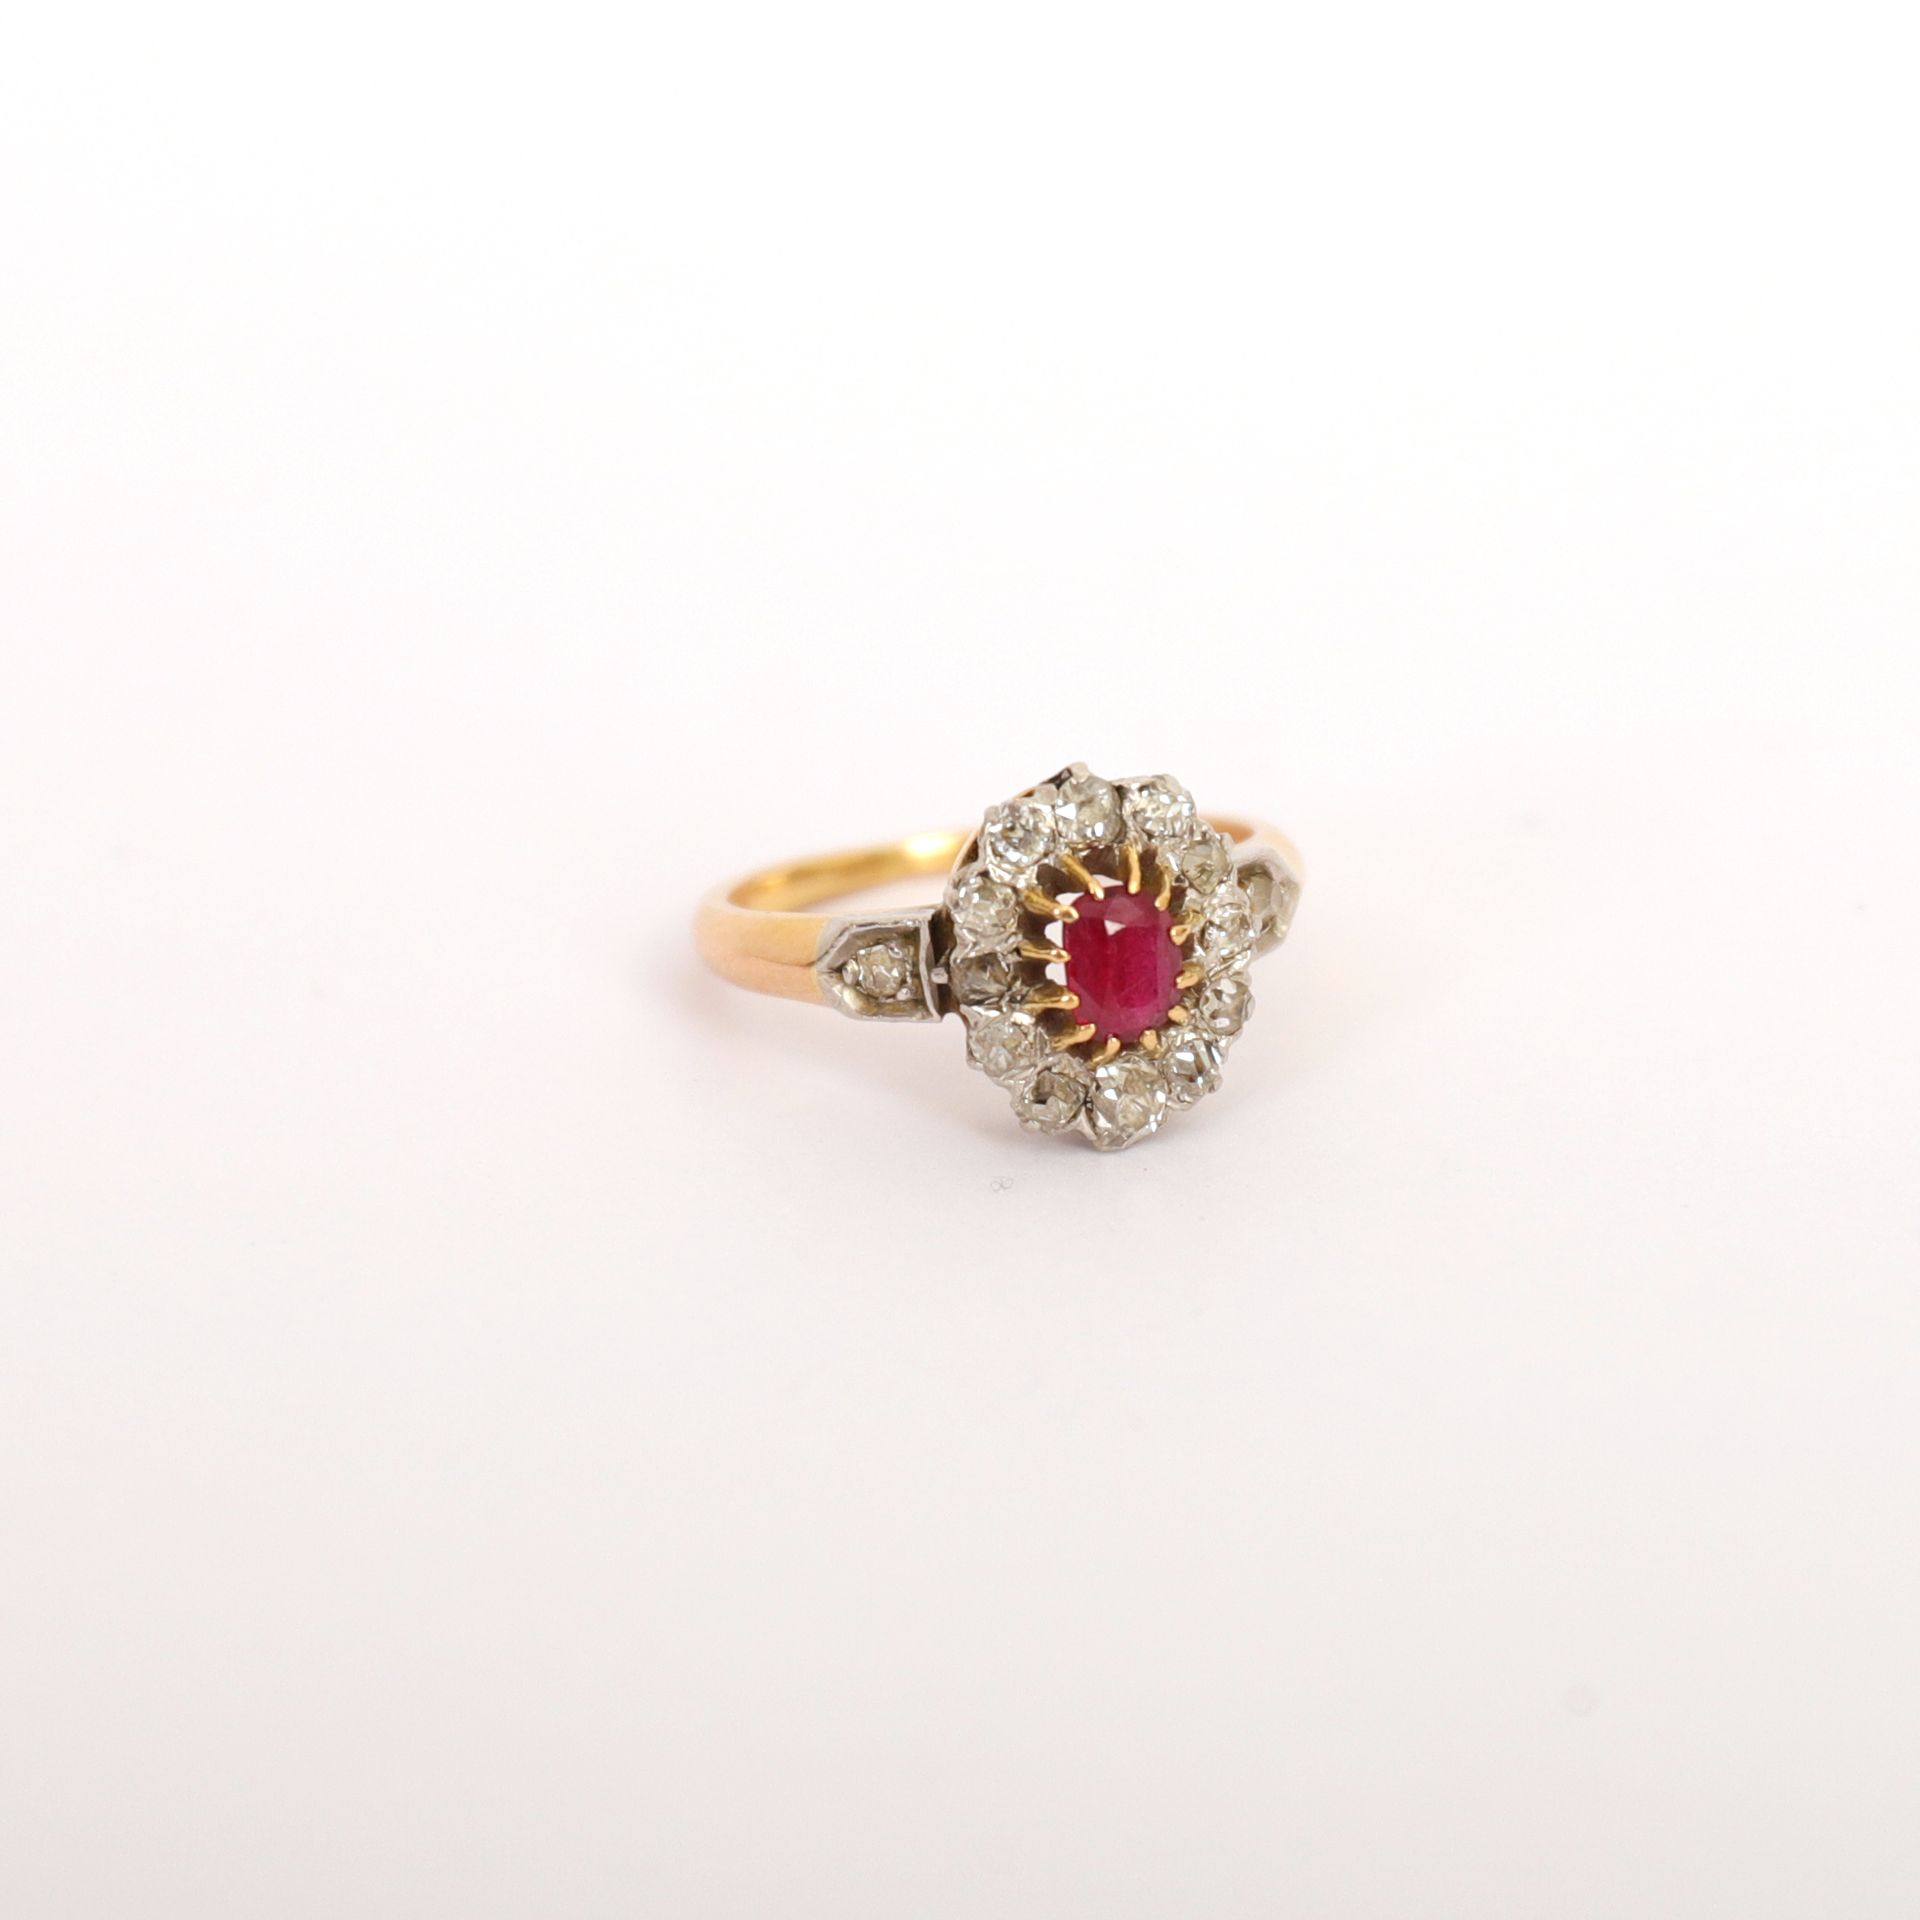 Null YELLOW GOLD RING SET WITH A RUBY SURROUNDED BY OLD CUT DIAMONDS

Eagle head&hellip;